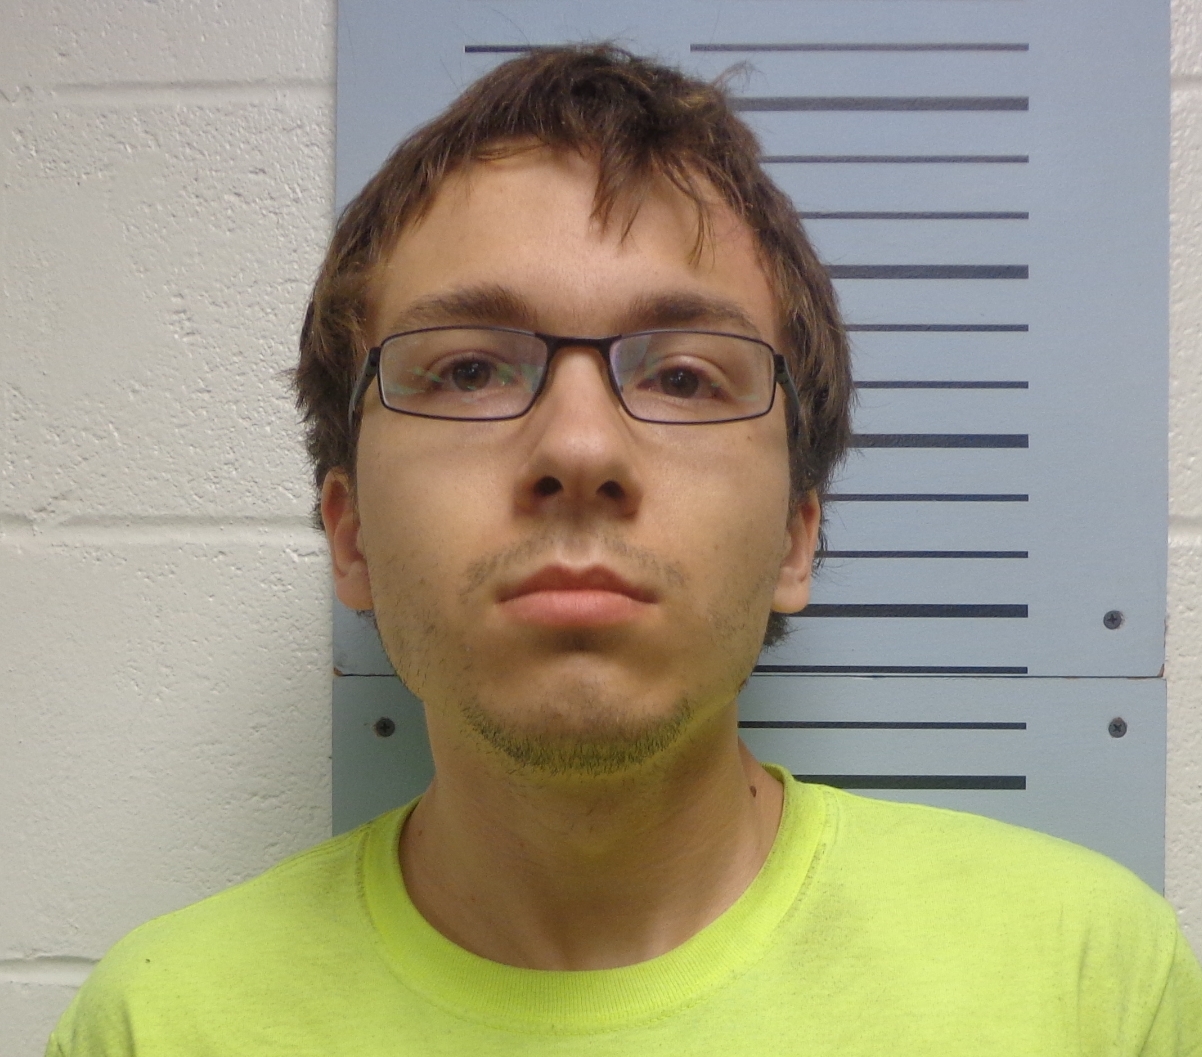 LOCAL MAN INDICTED FOR SEXUAL EXPLOITATION OF A MINOR Robertson County